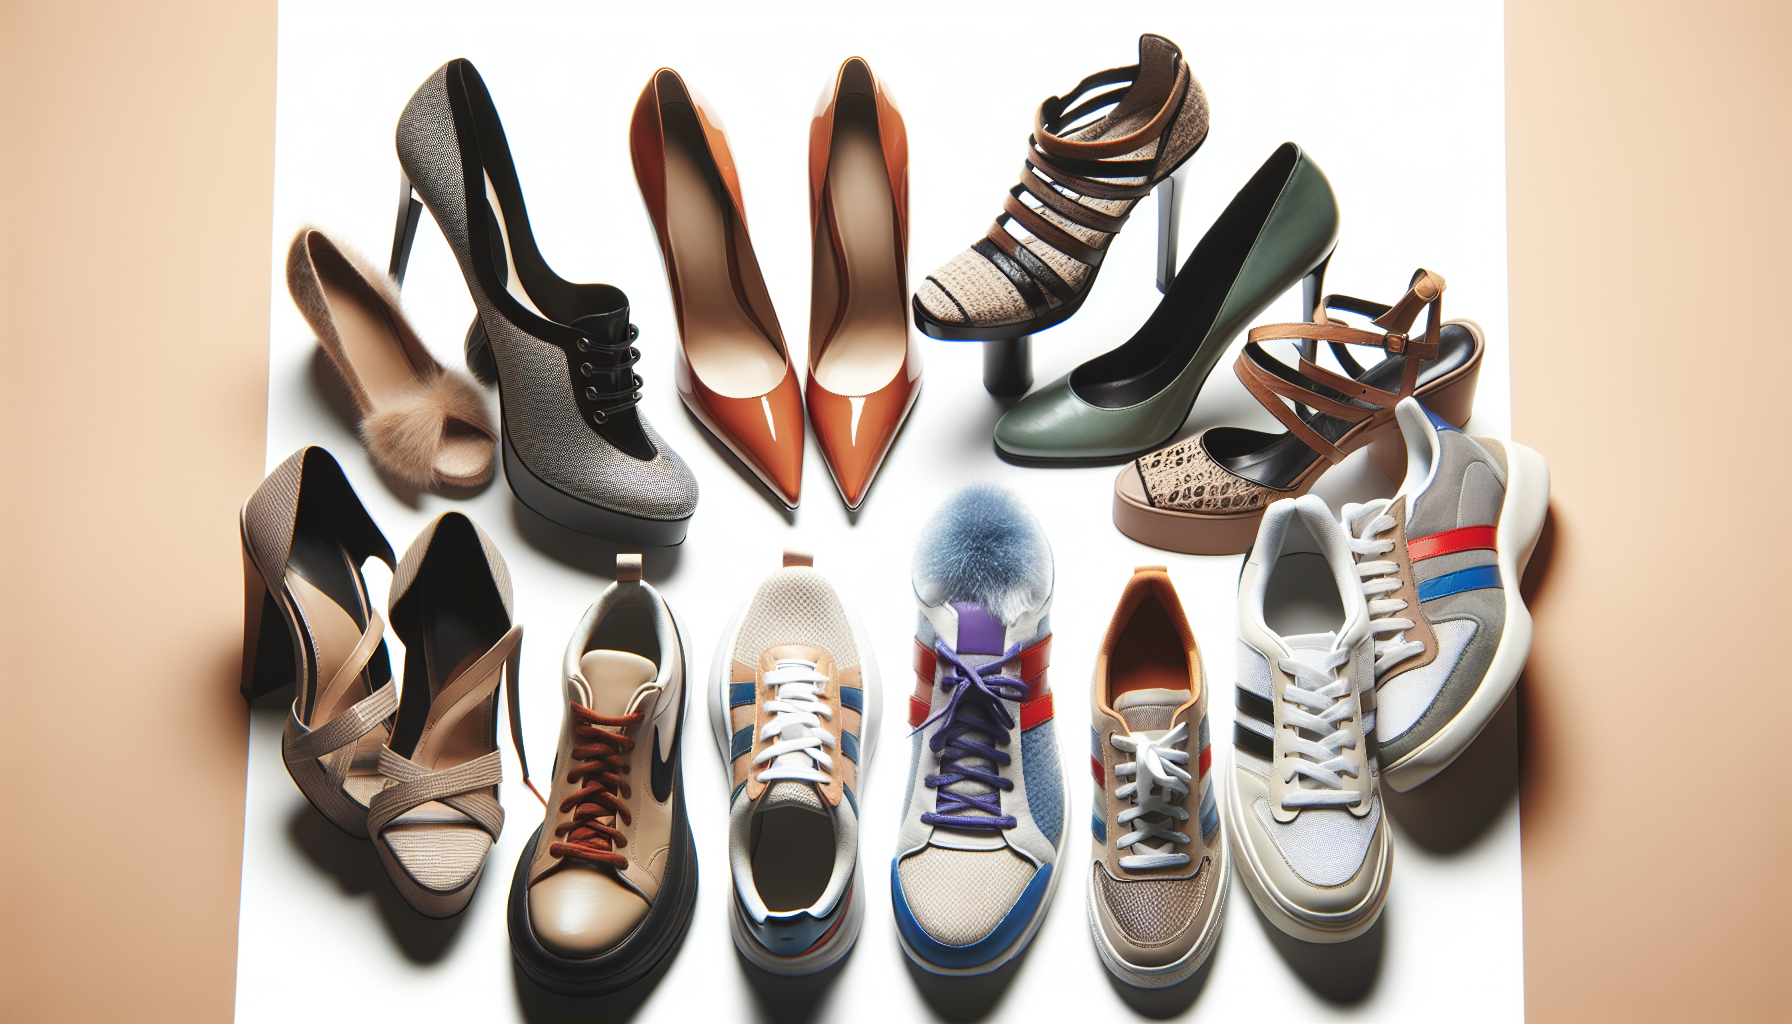 Illustration of various types of shoes